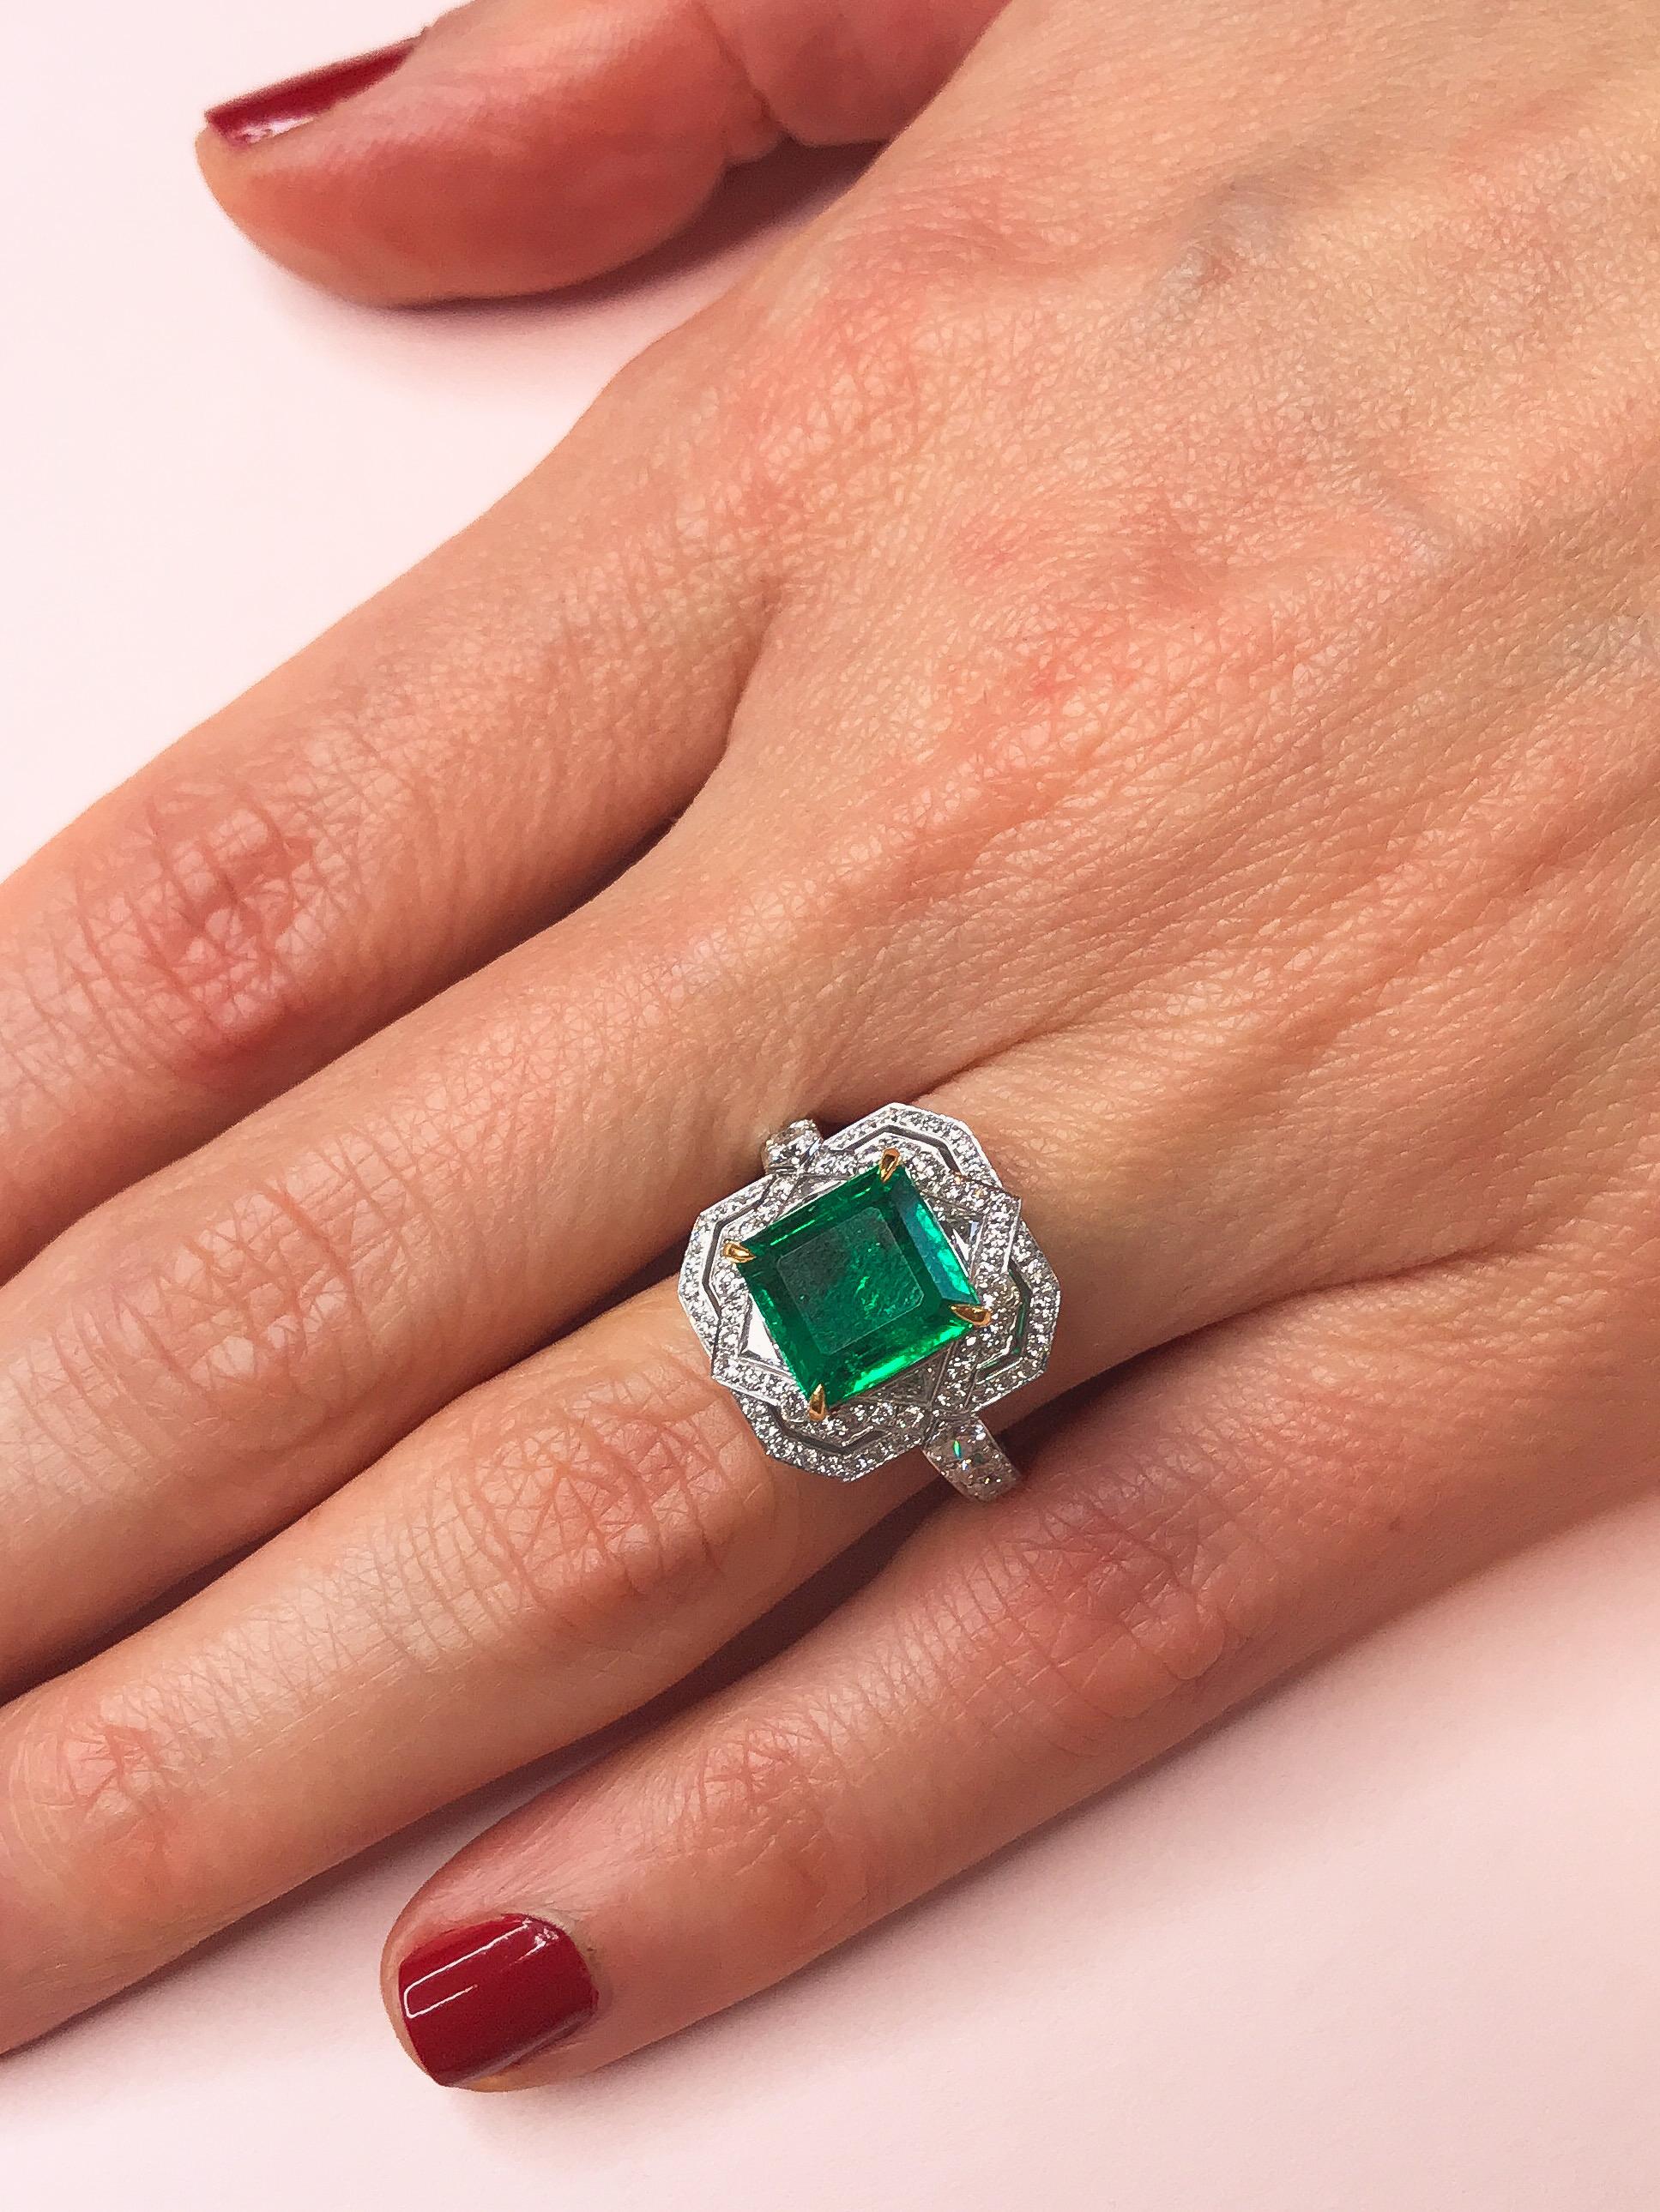 The resplendent green emerald at the heart of this Art Deco-inspired ring is an impressive stone, specially selected from the Haruni vault. Its deep, rich colour is offset by the gleaming white of the small diamonds in the ring’s double halo